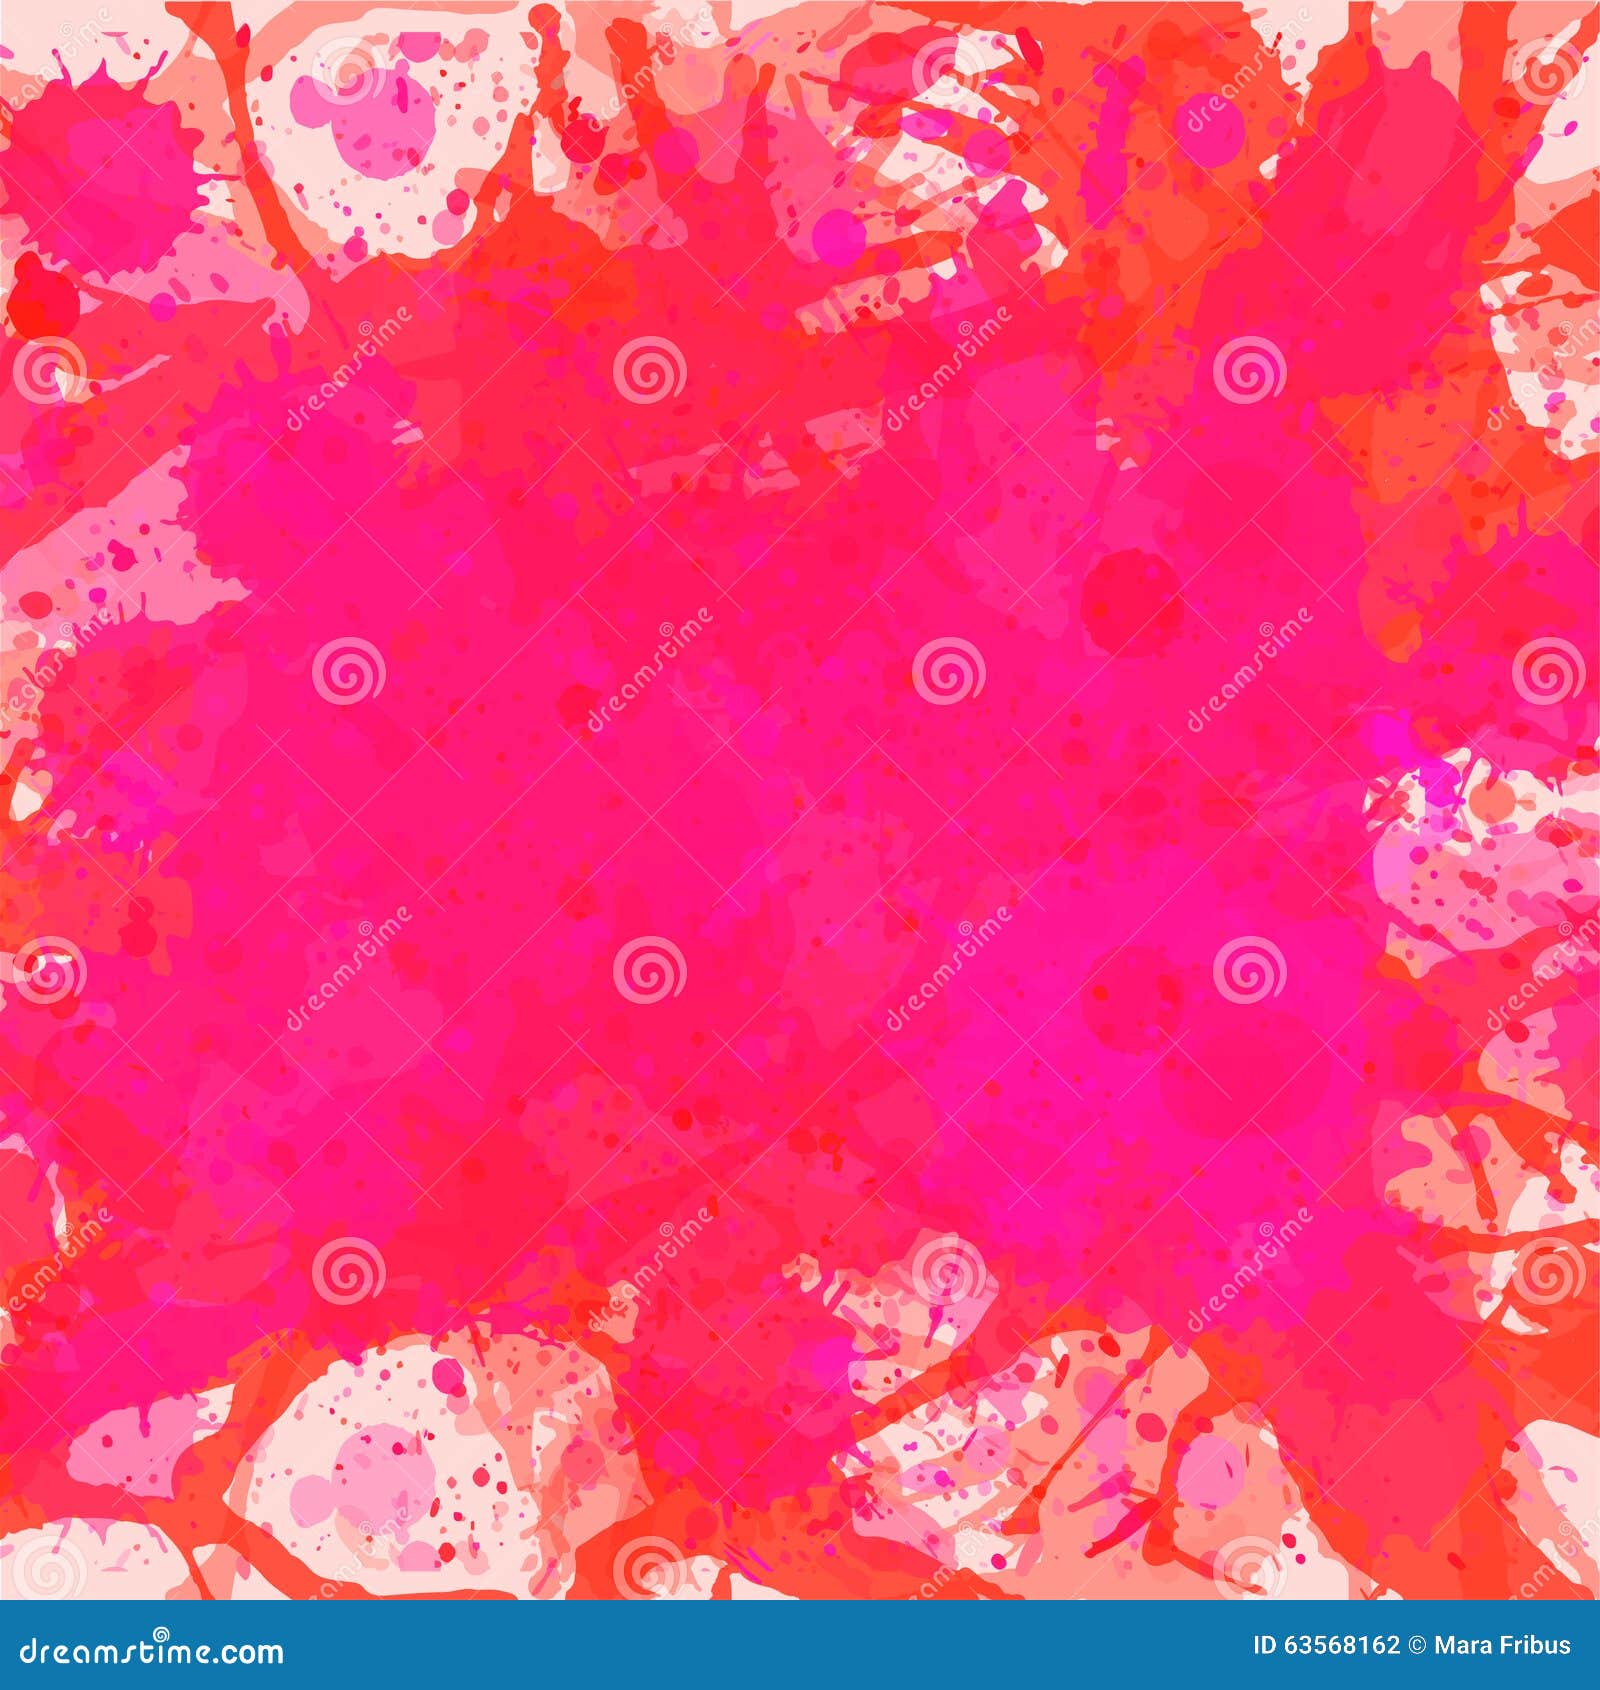 Pink Watercolor Paint Splashes Background Stock Vector - Illustration ...